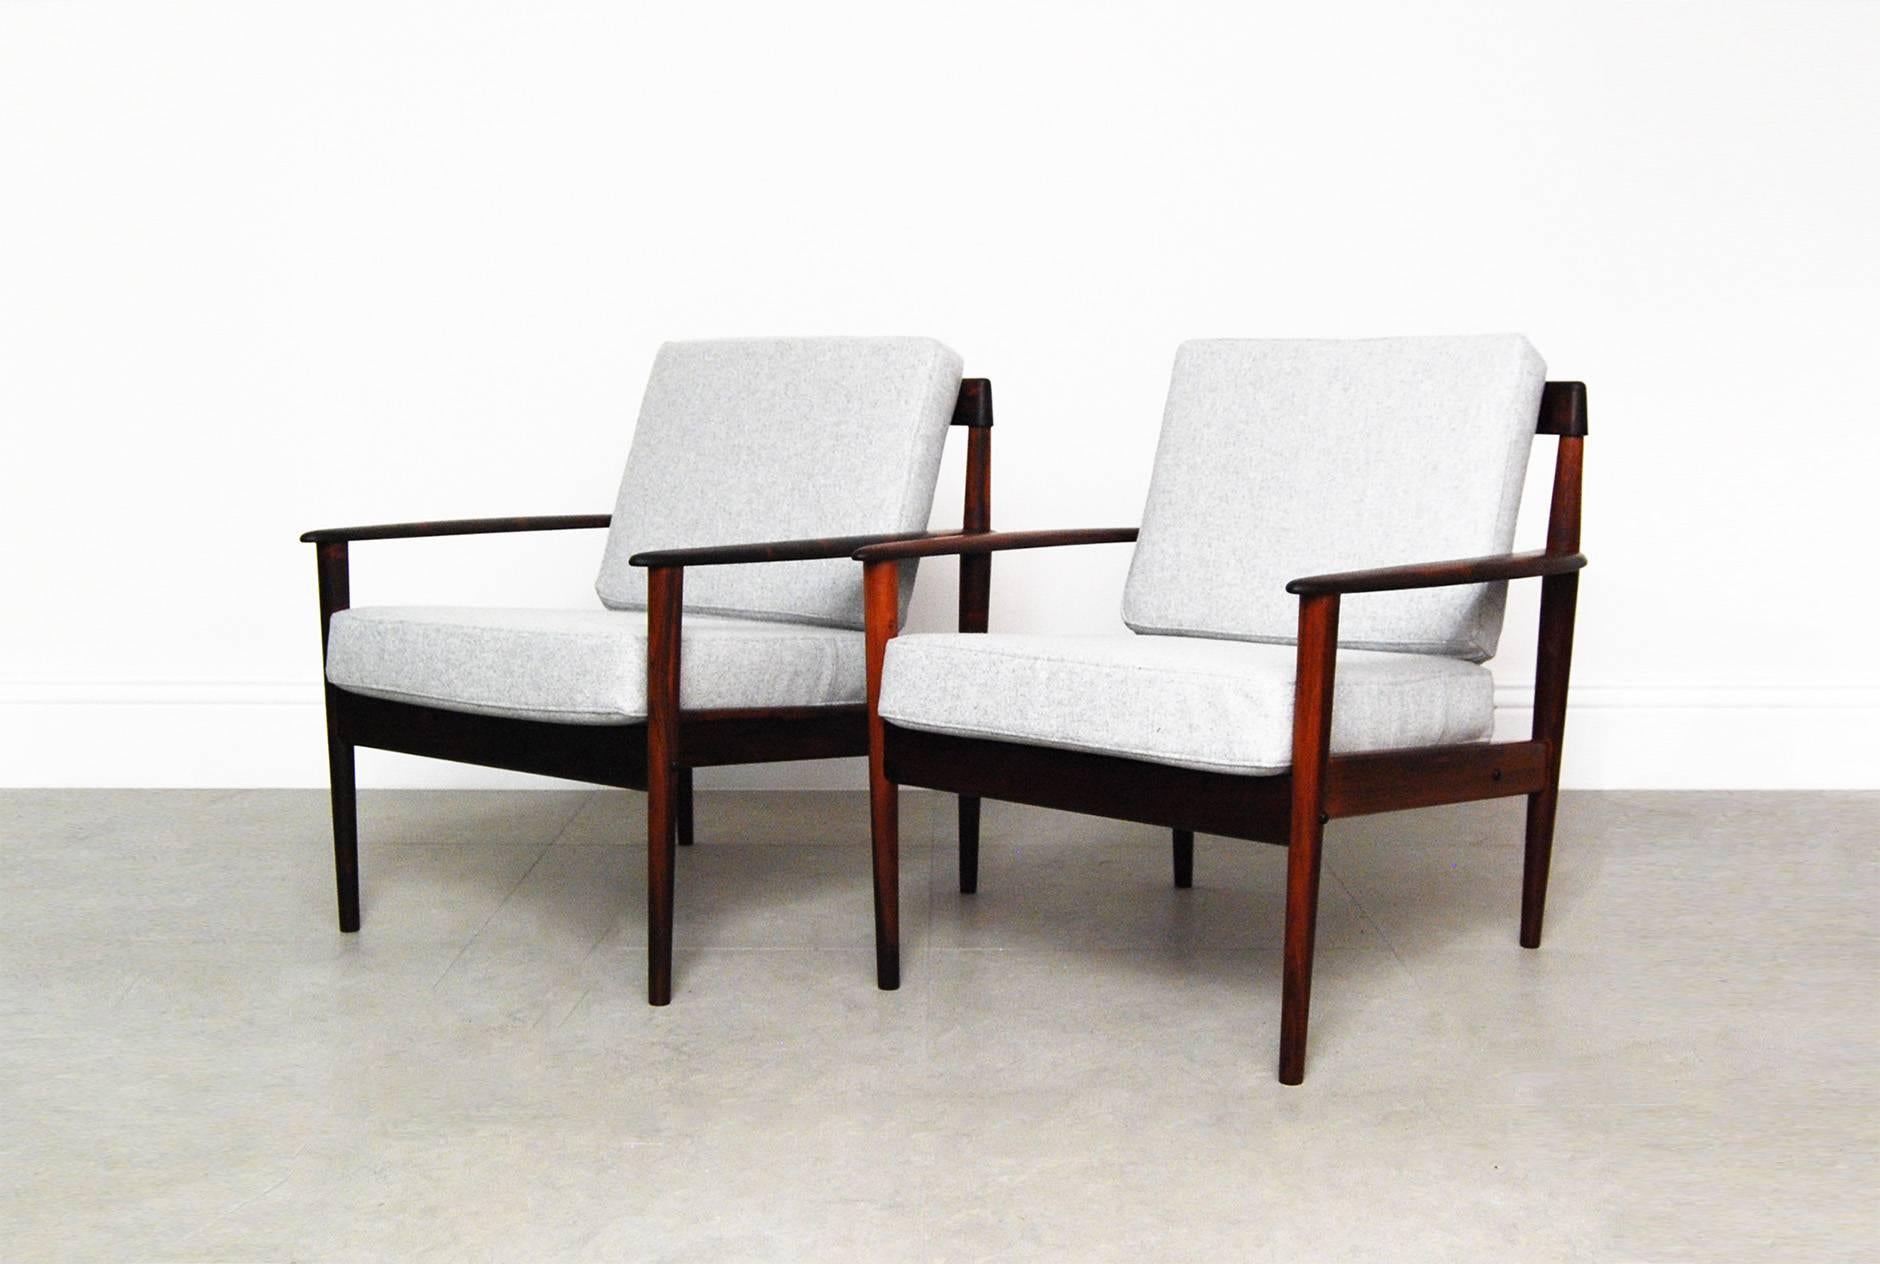 A pair of beautiful armchairs and matching ottoman designed by Grete Jalk for Poul Jeppesen, Denmark, circa 1956. These examples come in solid Brazilian rosewood with a particularly unusual, exotic grain. Danish furniture control badge and maker's